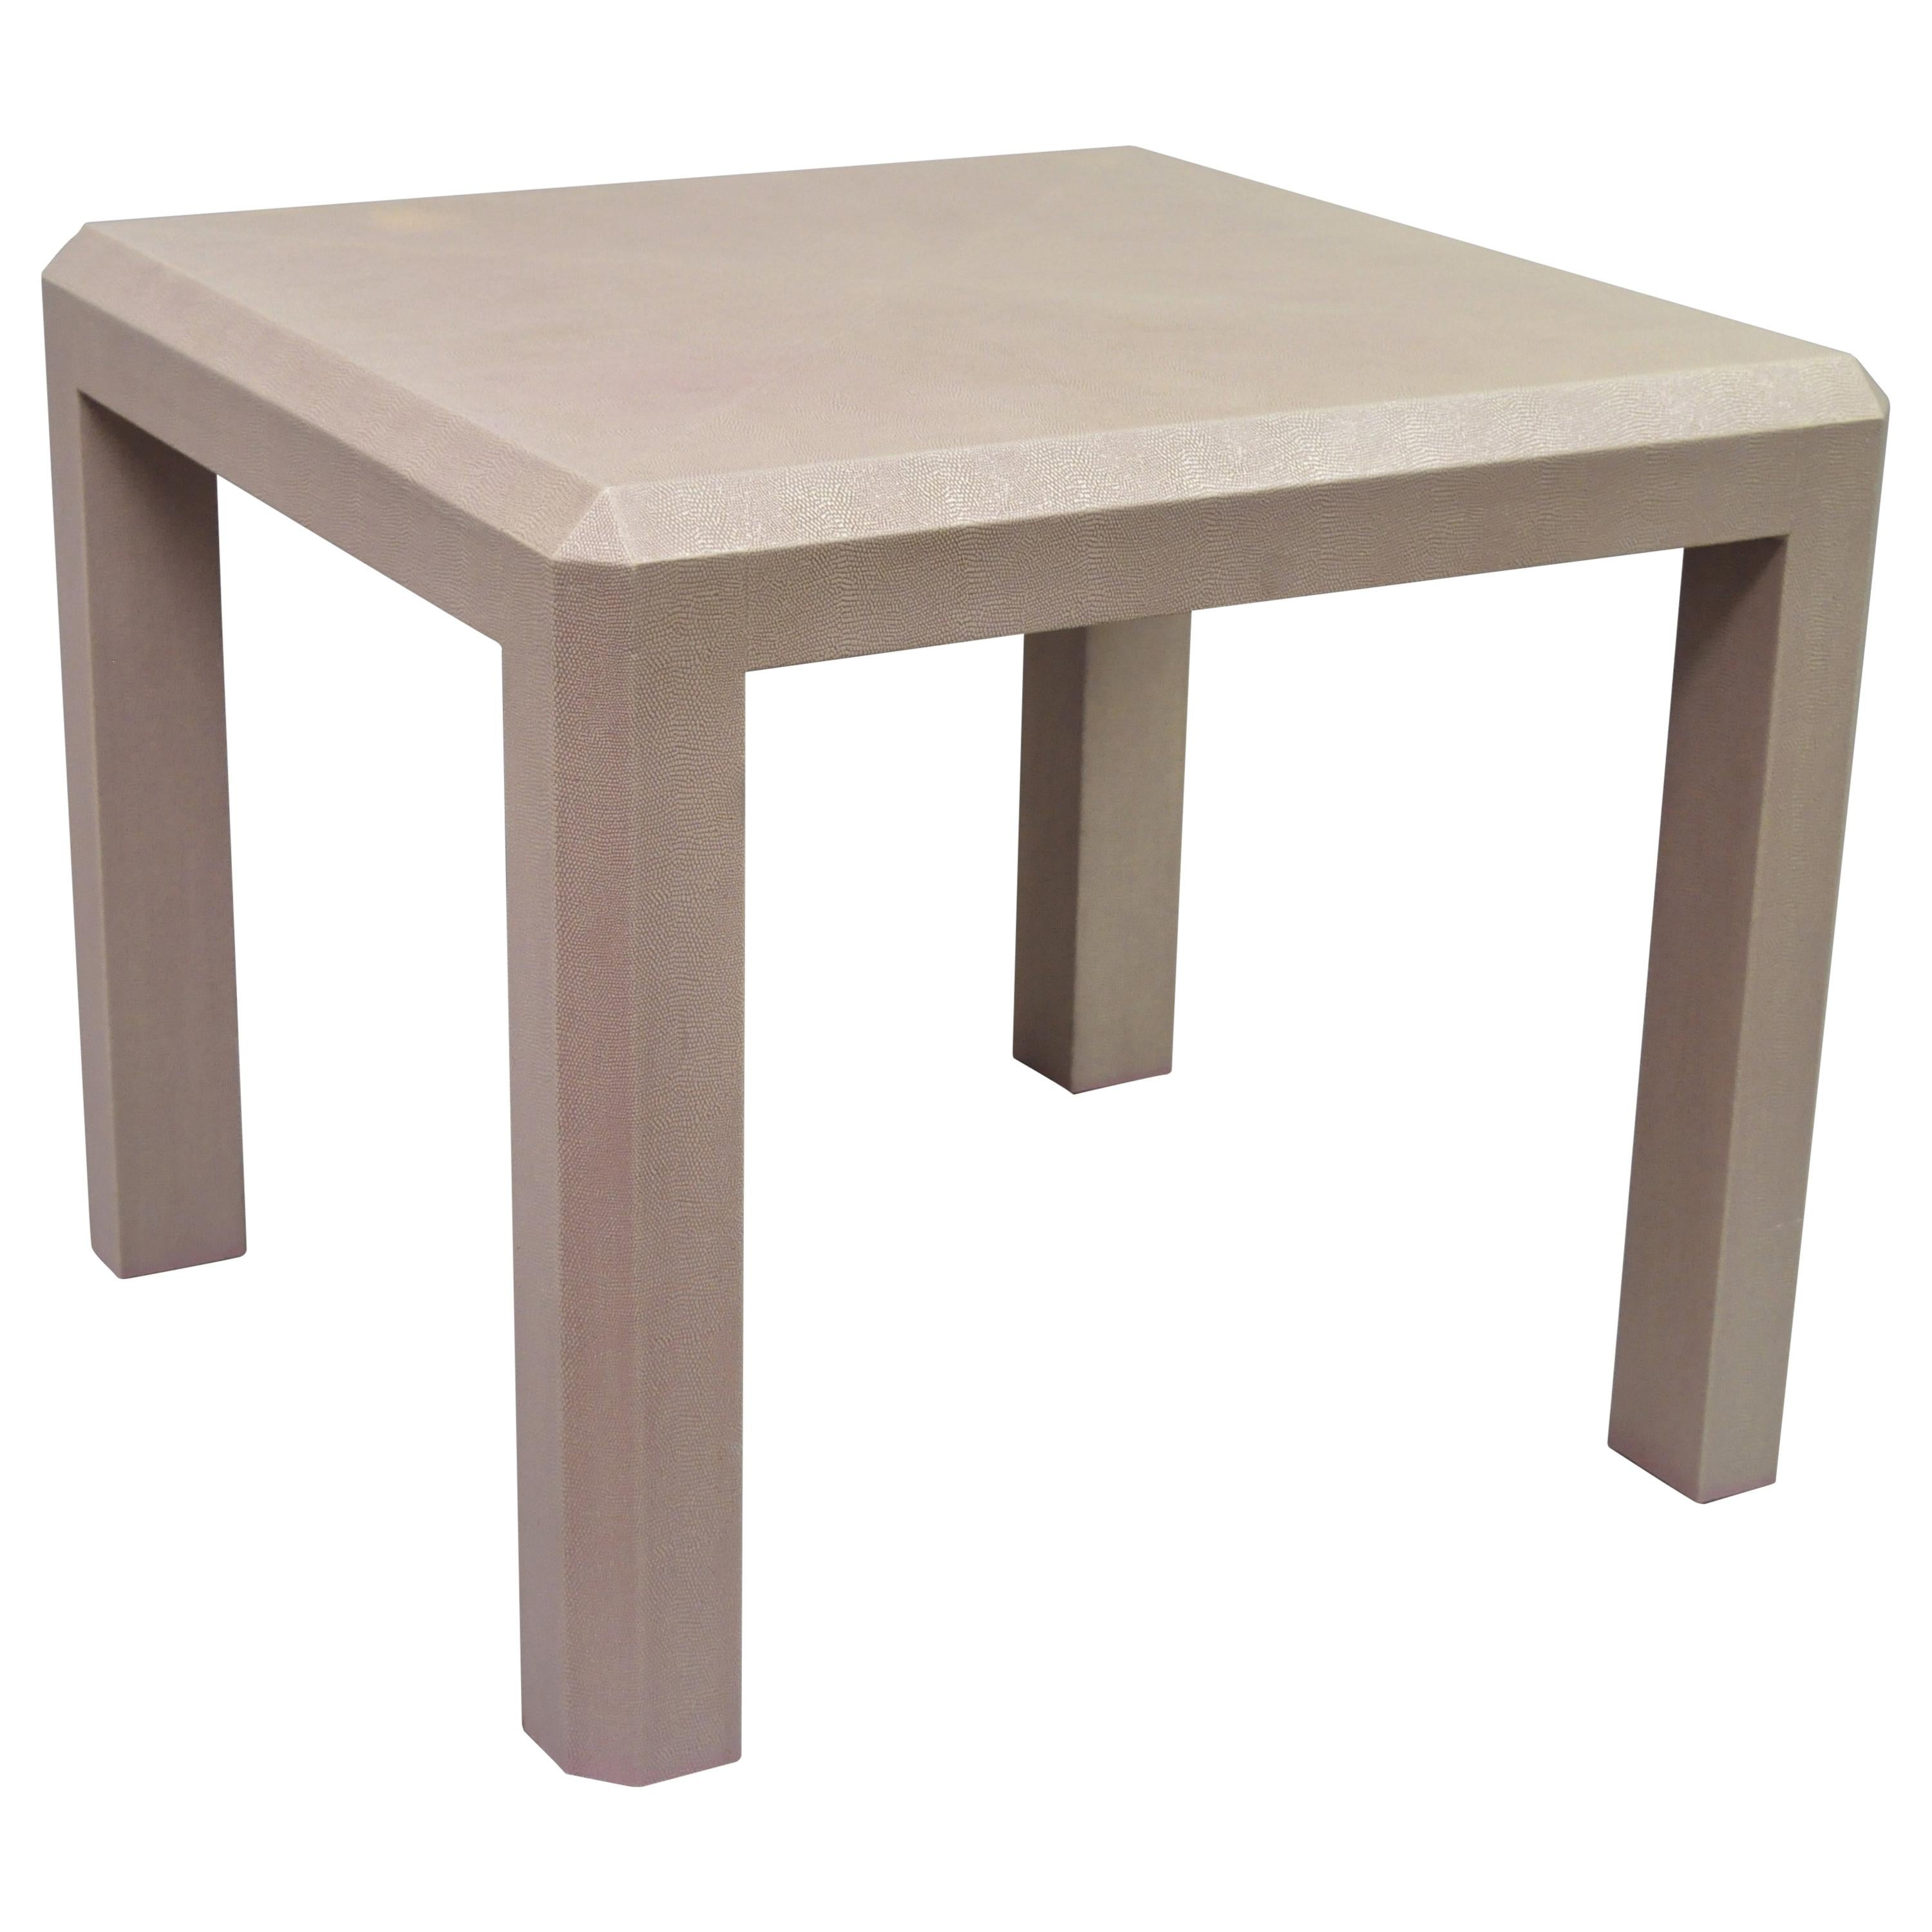 Why is it called a Parsons table?